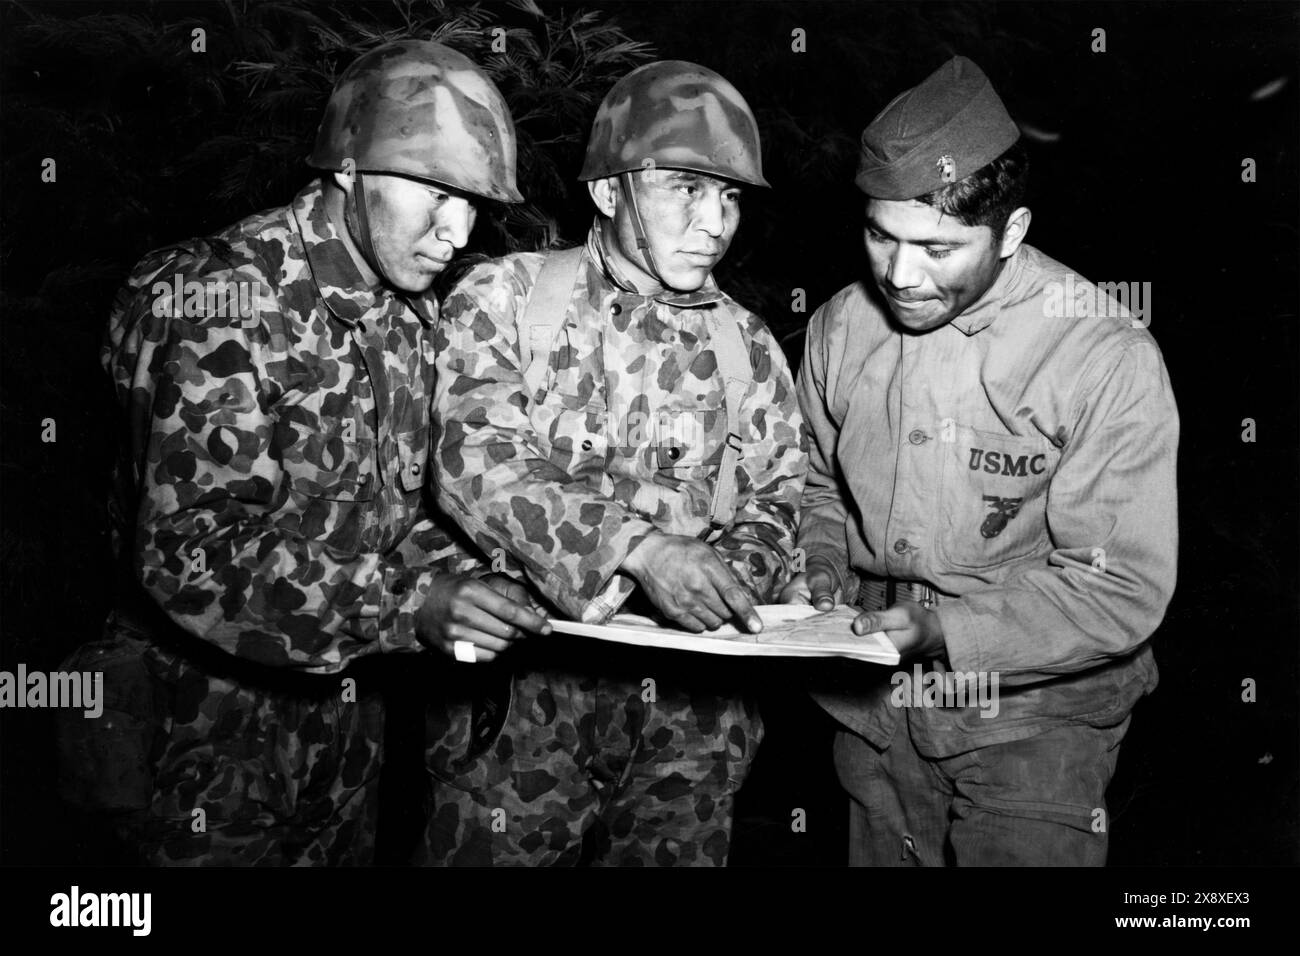 Navajo code talkers, members of the signal company and attached with the 1st Marine Division in the Southwest Pacific, study a night problem at the Amphibious Scout School conducted by the Intelligence Section during World War II in 1943. Stock Photo